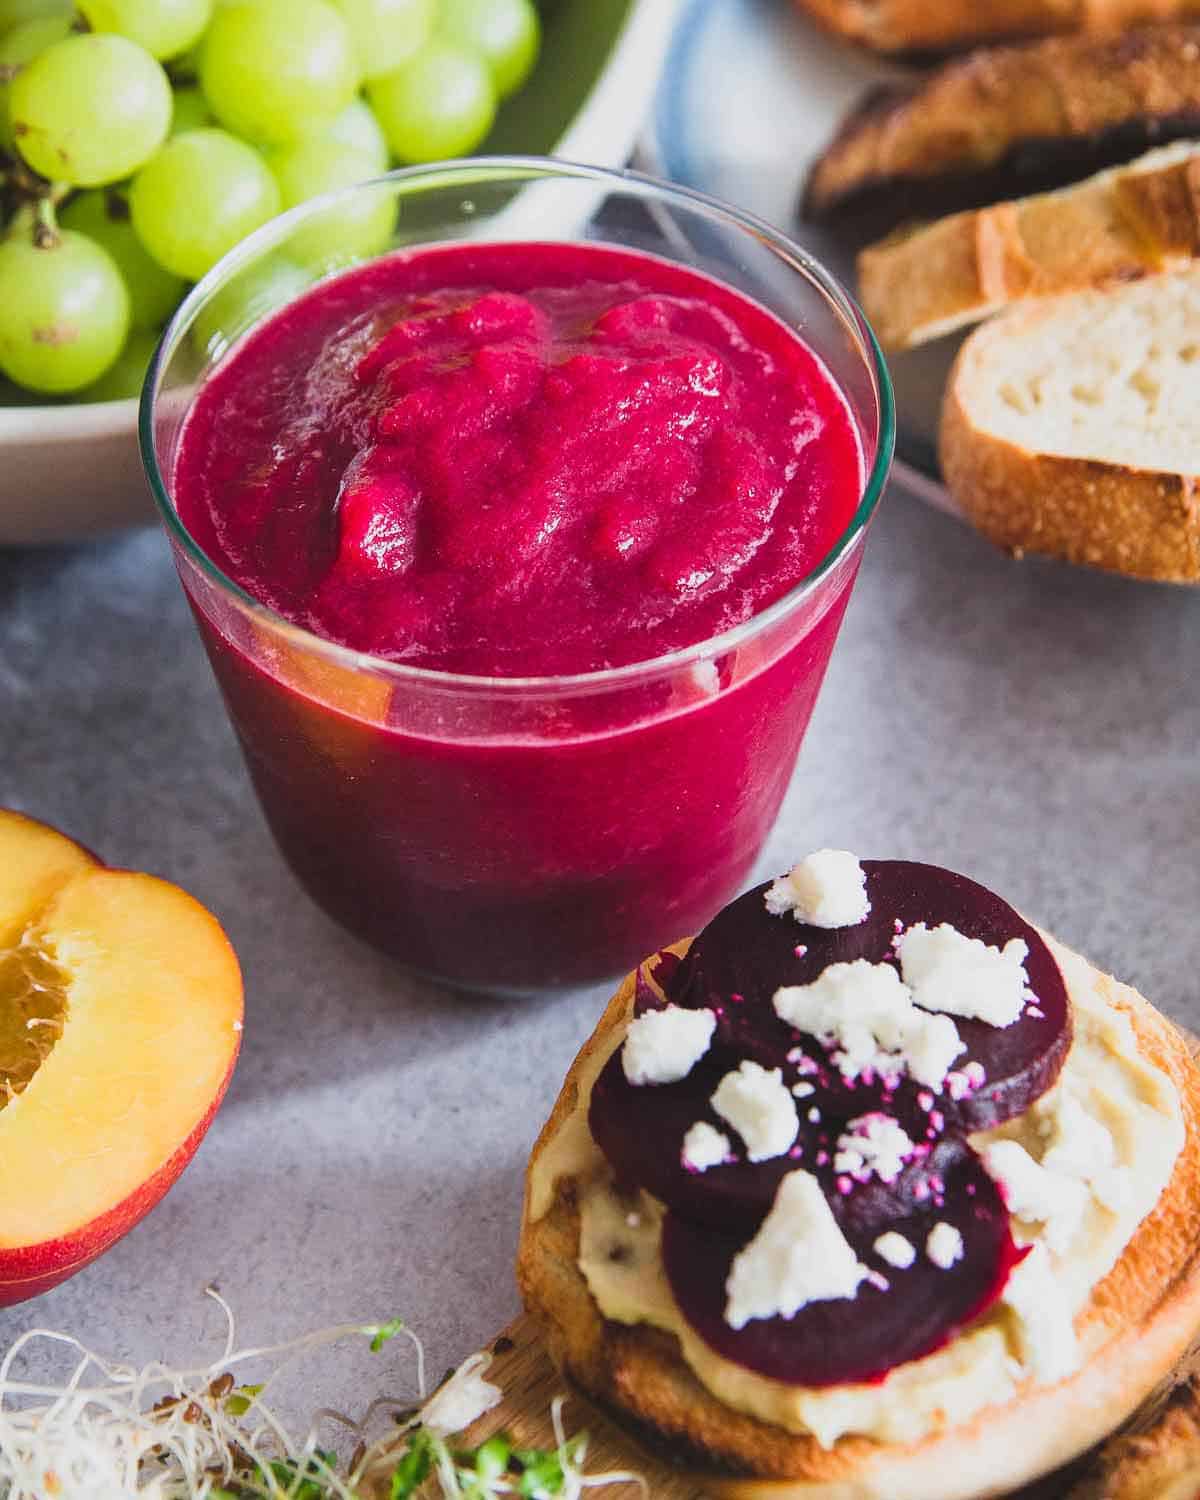 A simple red beet smoothie recipe that uses just a few fruits and vegetables easily found in the grocery store for a healthy start to the day.